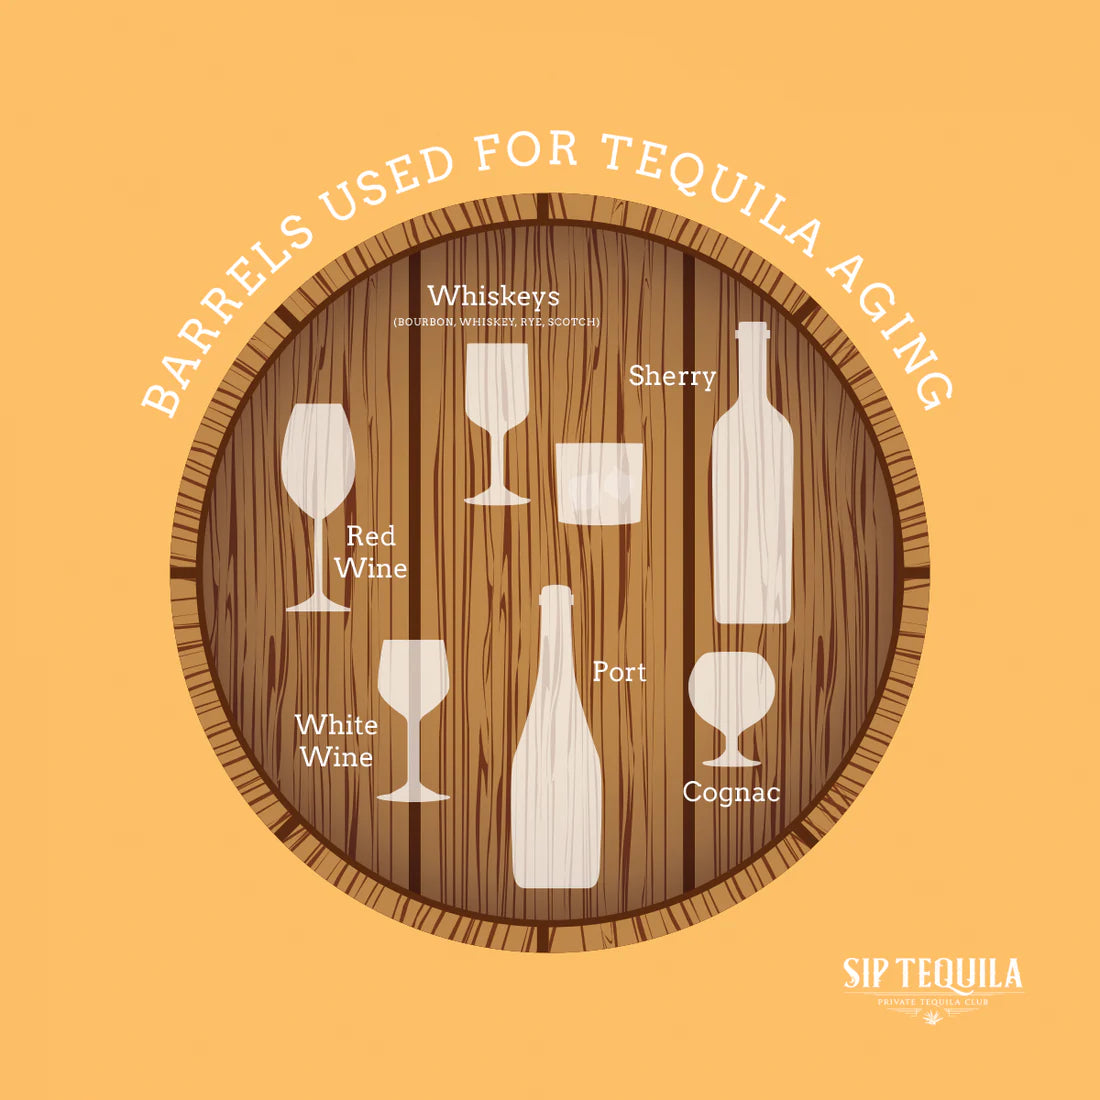 Barrels_Used_for_Tequila_Aging_1100x_jpg